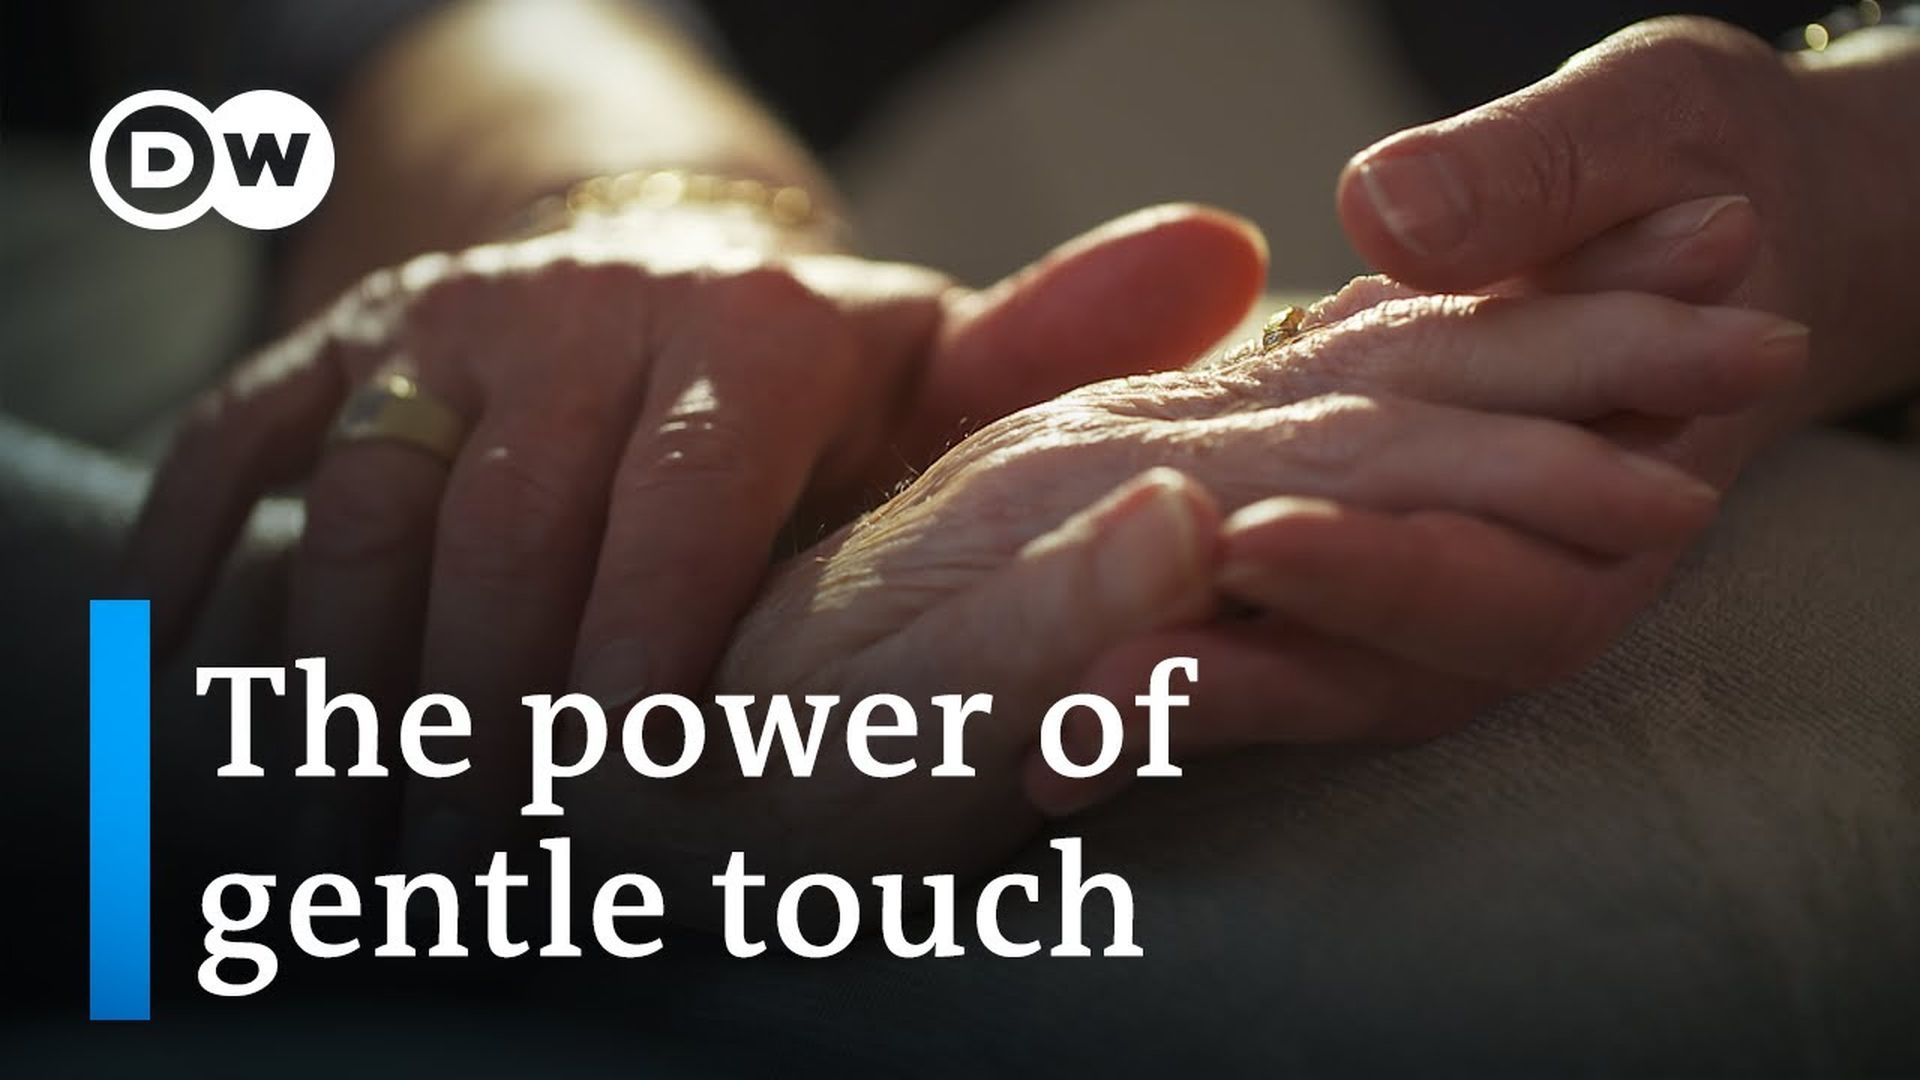 How Does Touch Affect Our Mental & Physical Health?